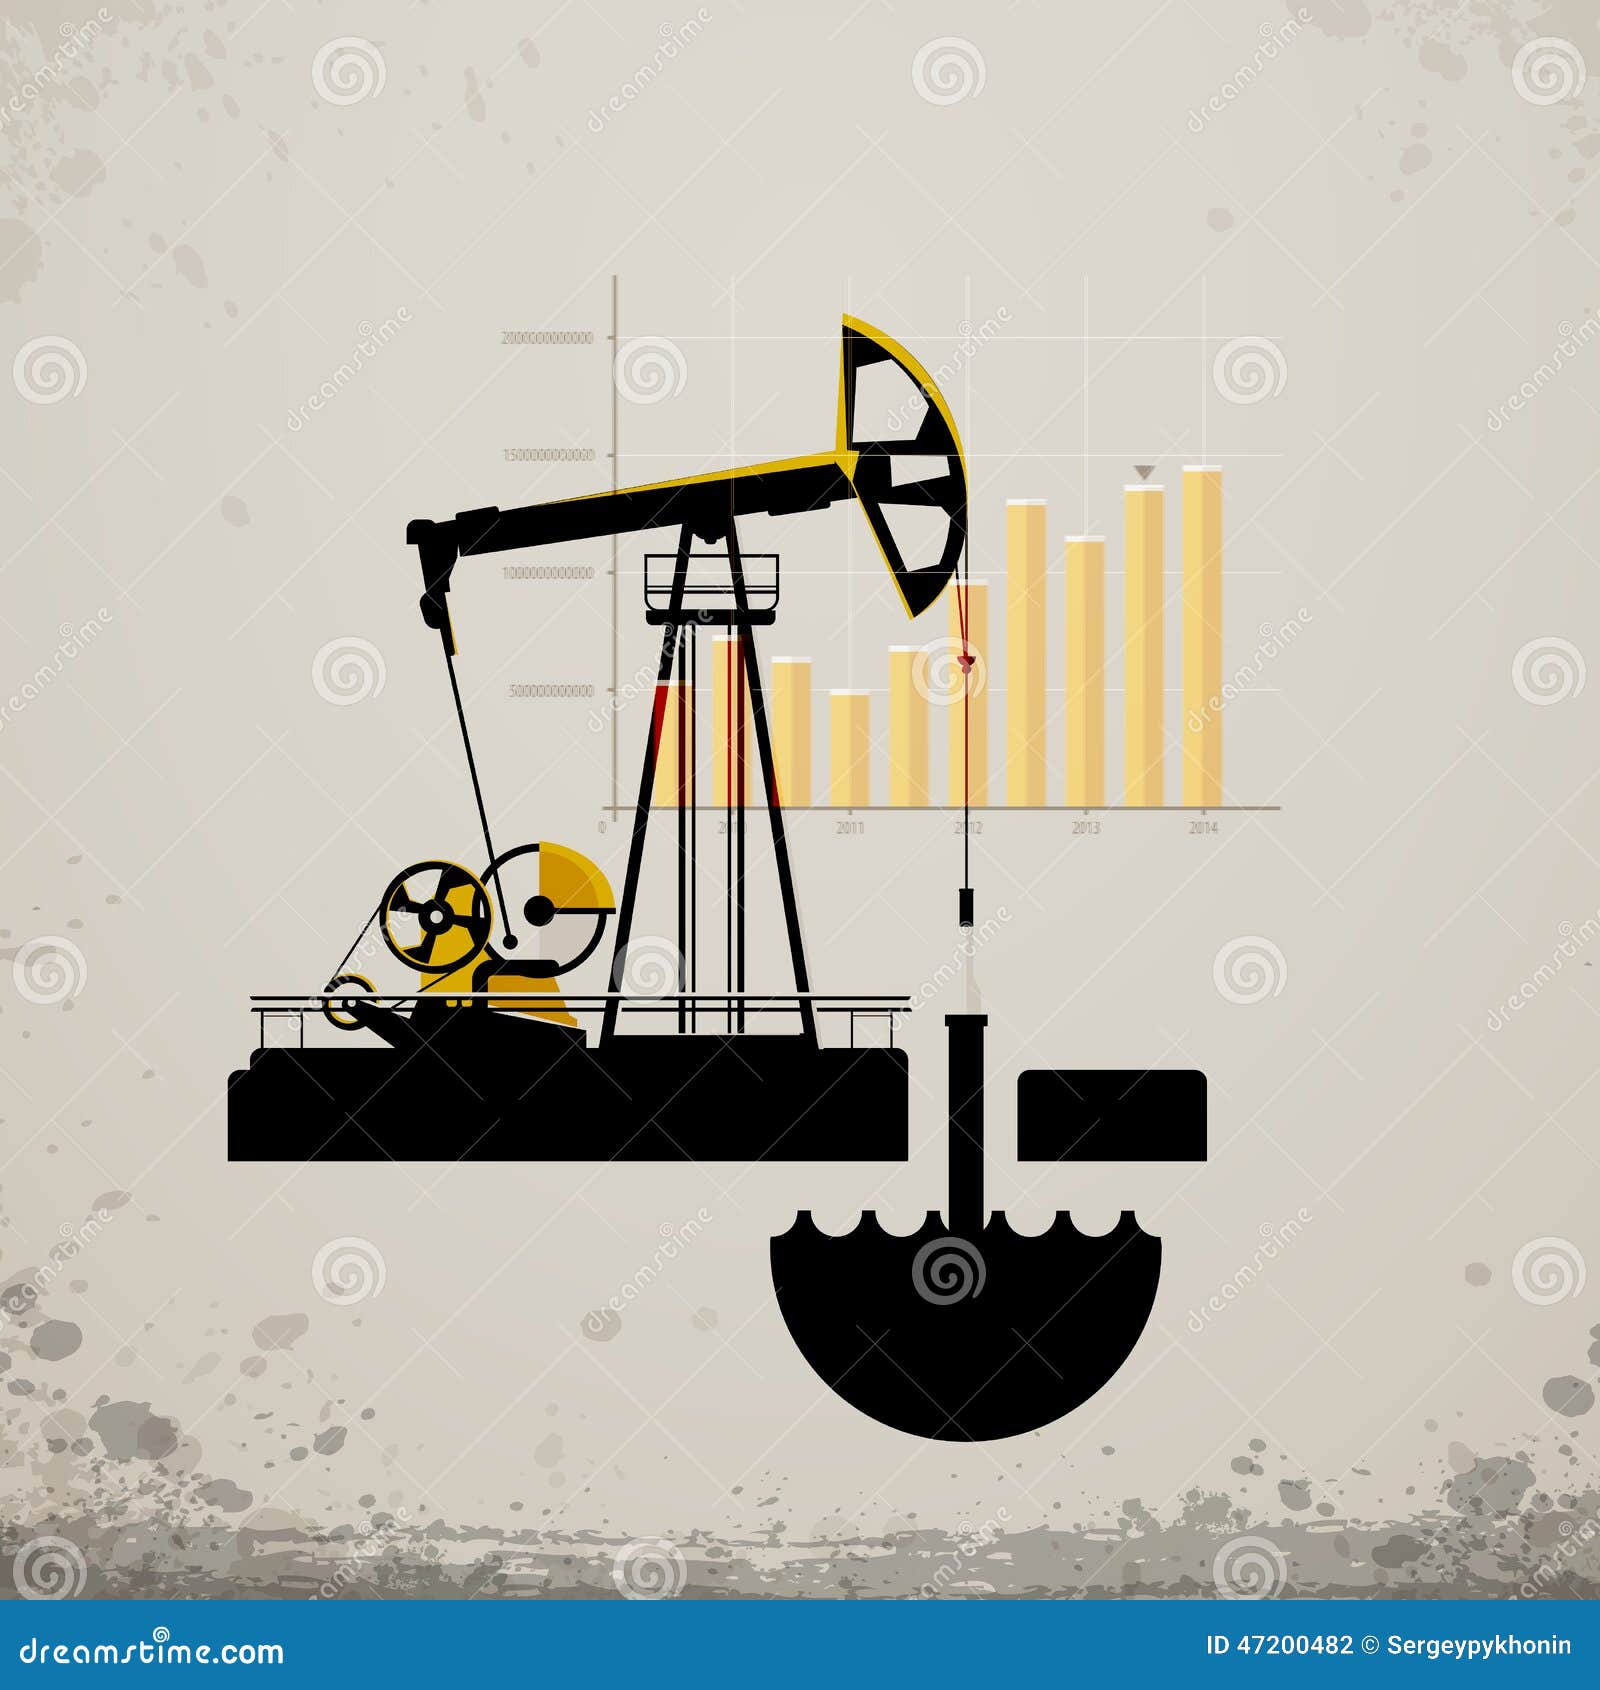 Oil pump jack. Statistics oil production in the world